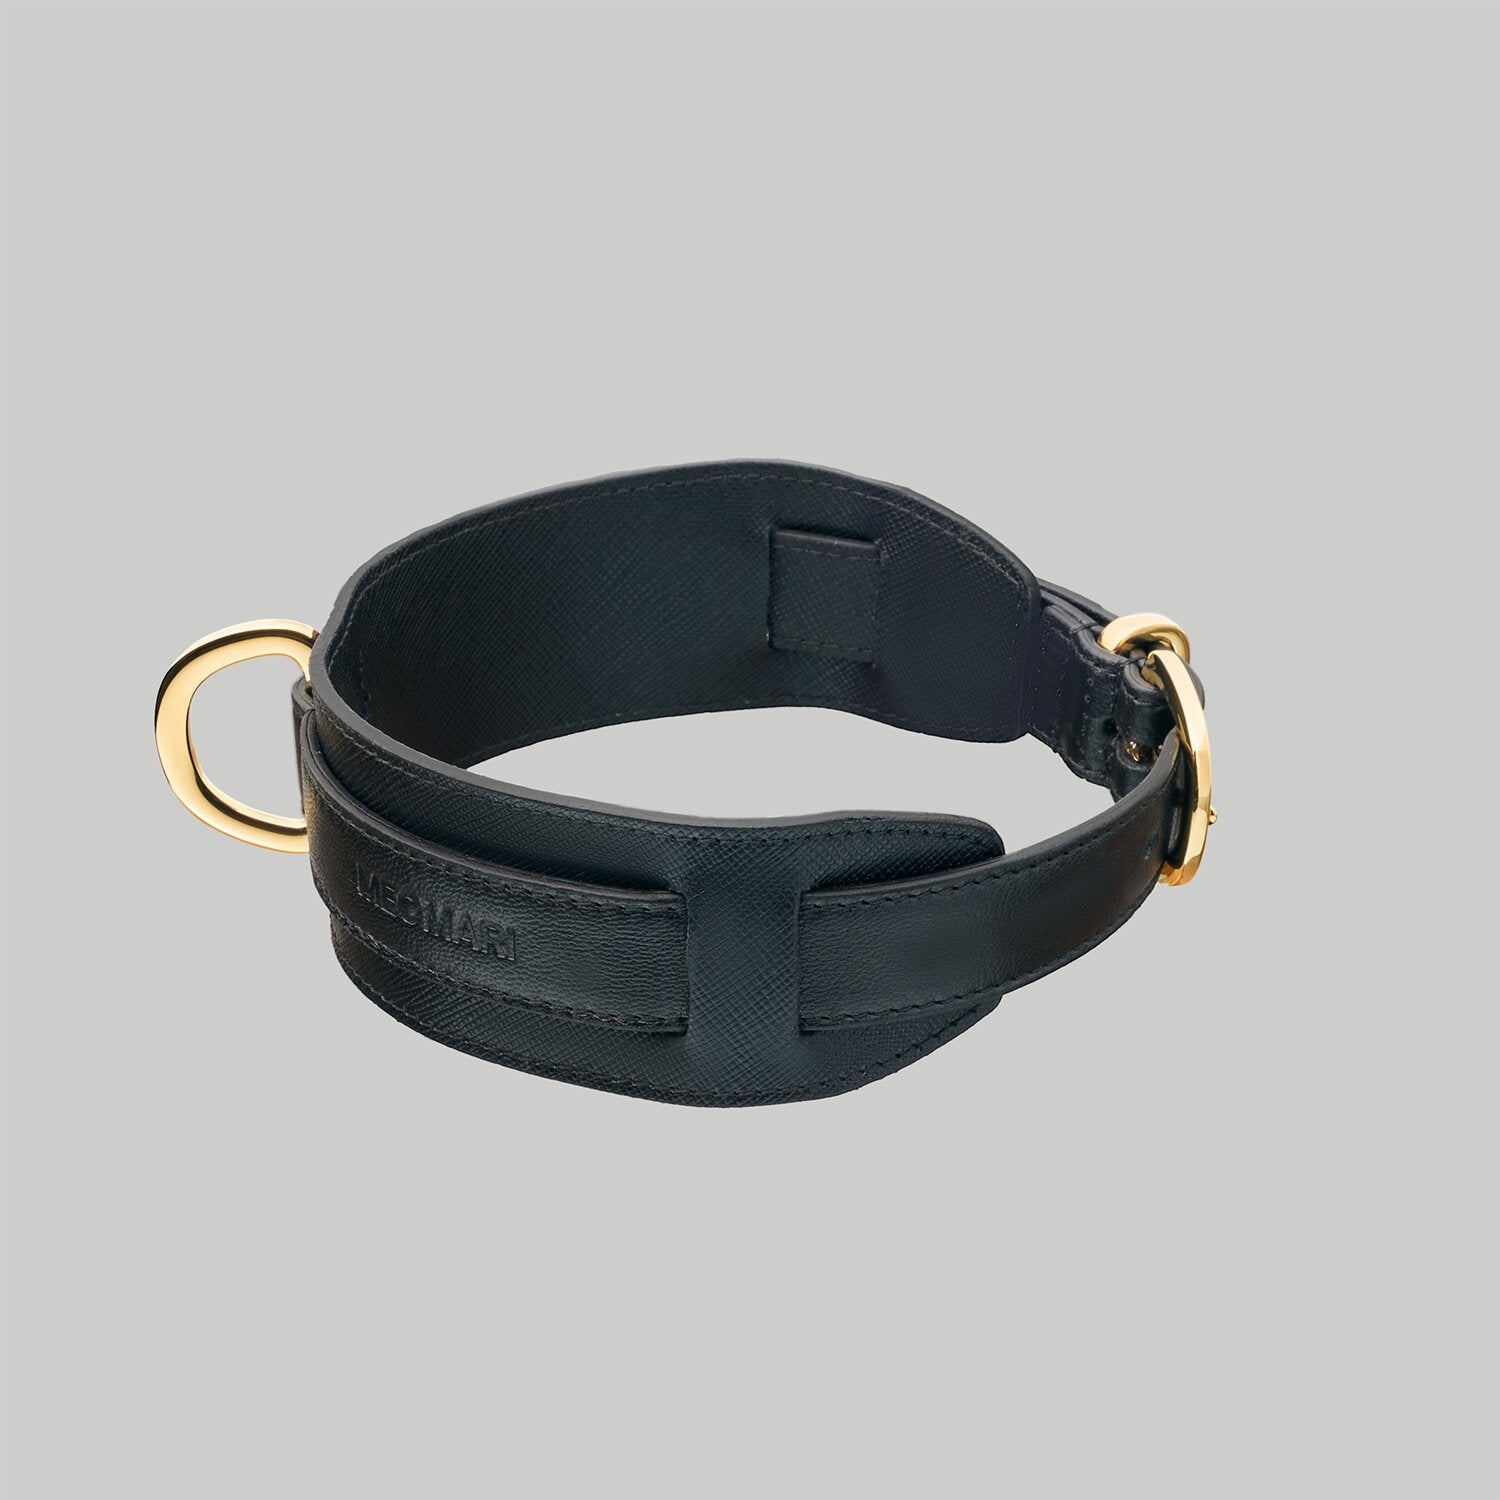 Luxury Dog collar in black Saffiano leather with Gold